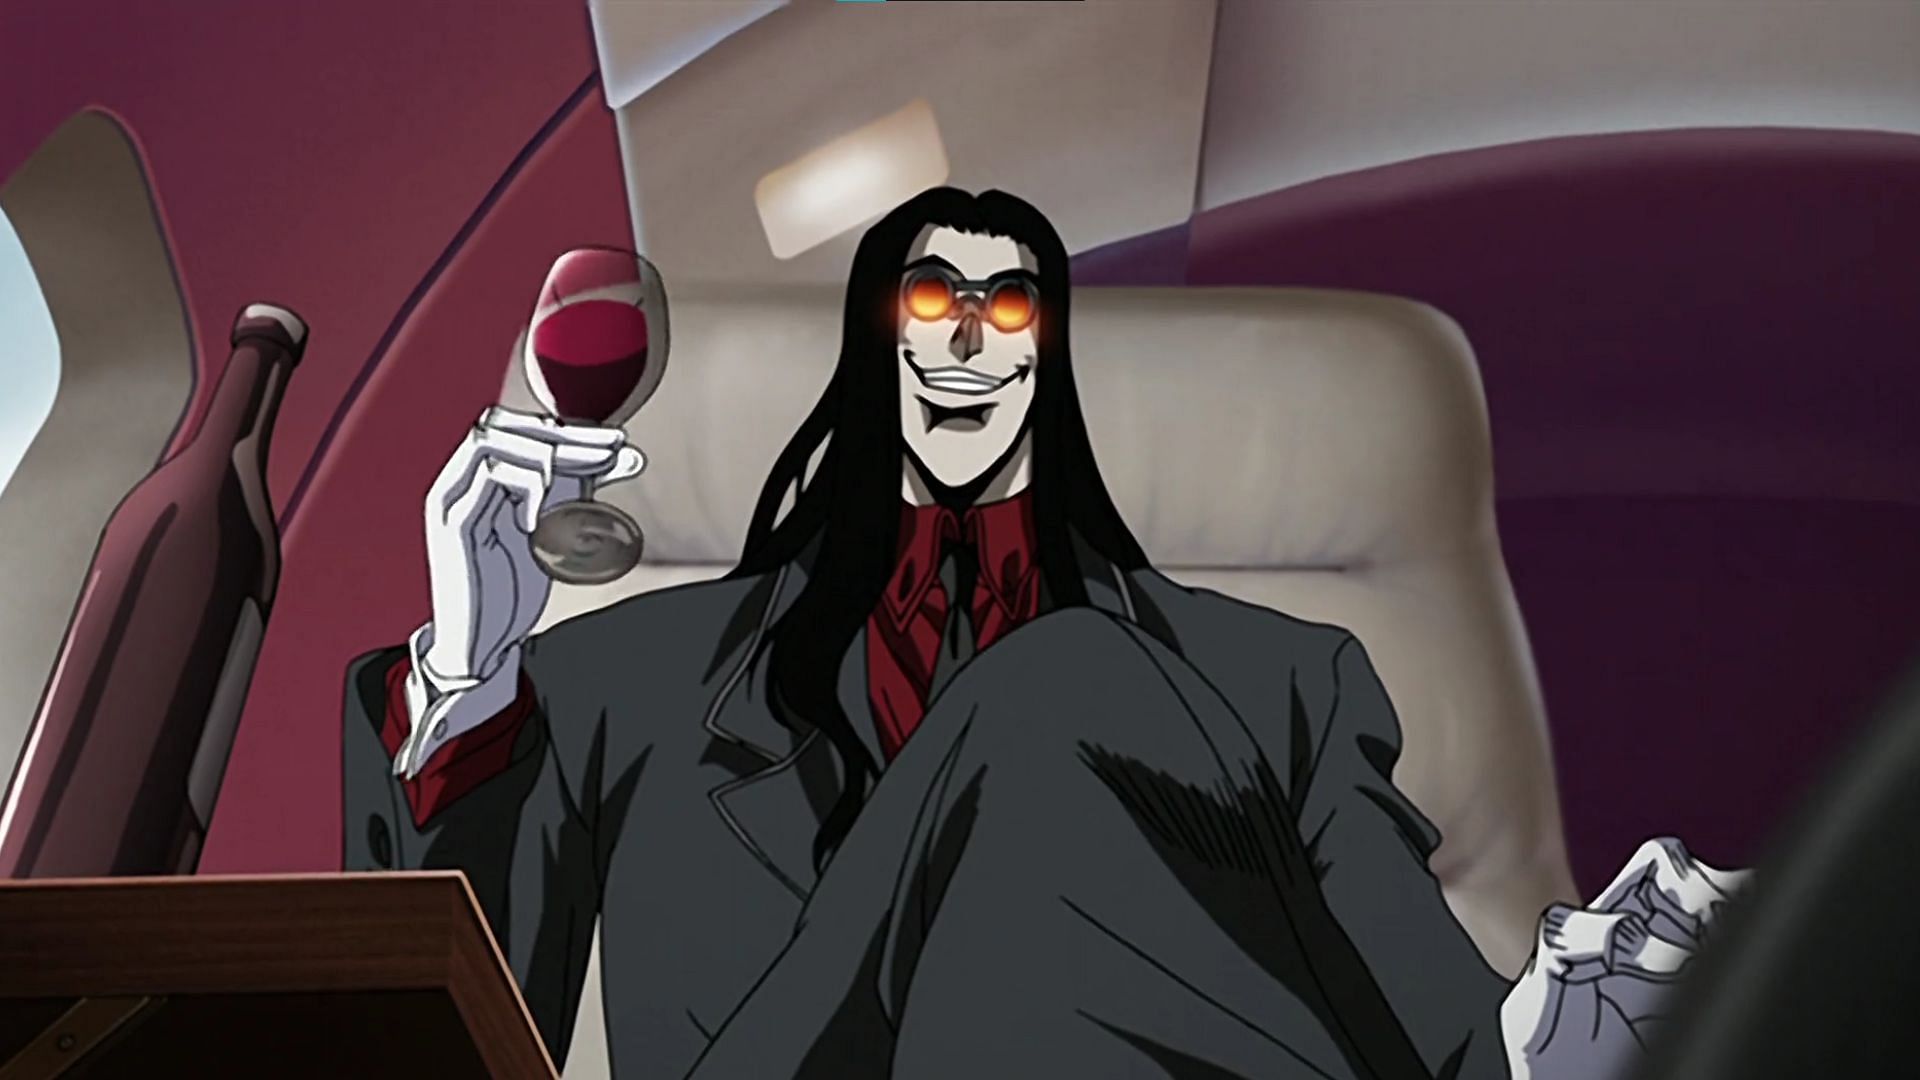 Alucard as shown in the Hellsing Ultimate anime (Image via Studio MADHOUSE)